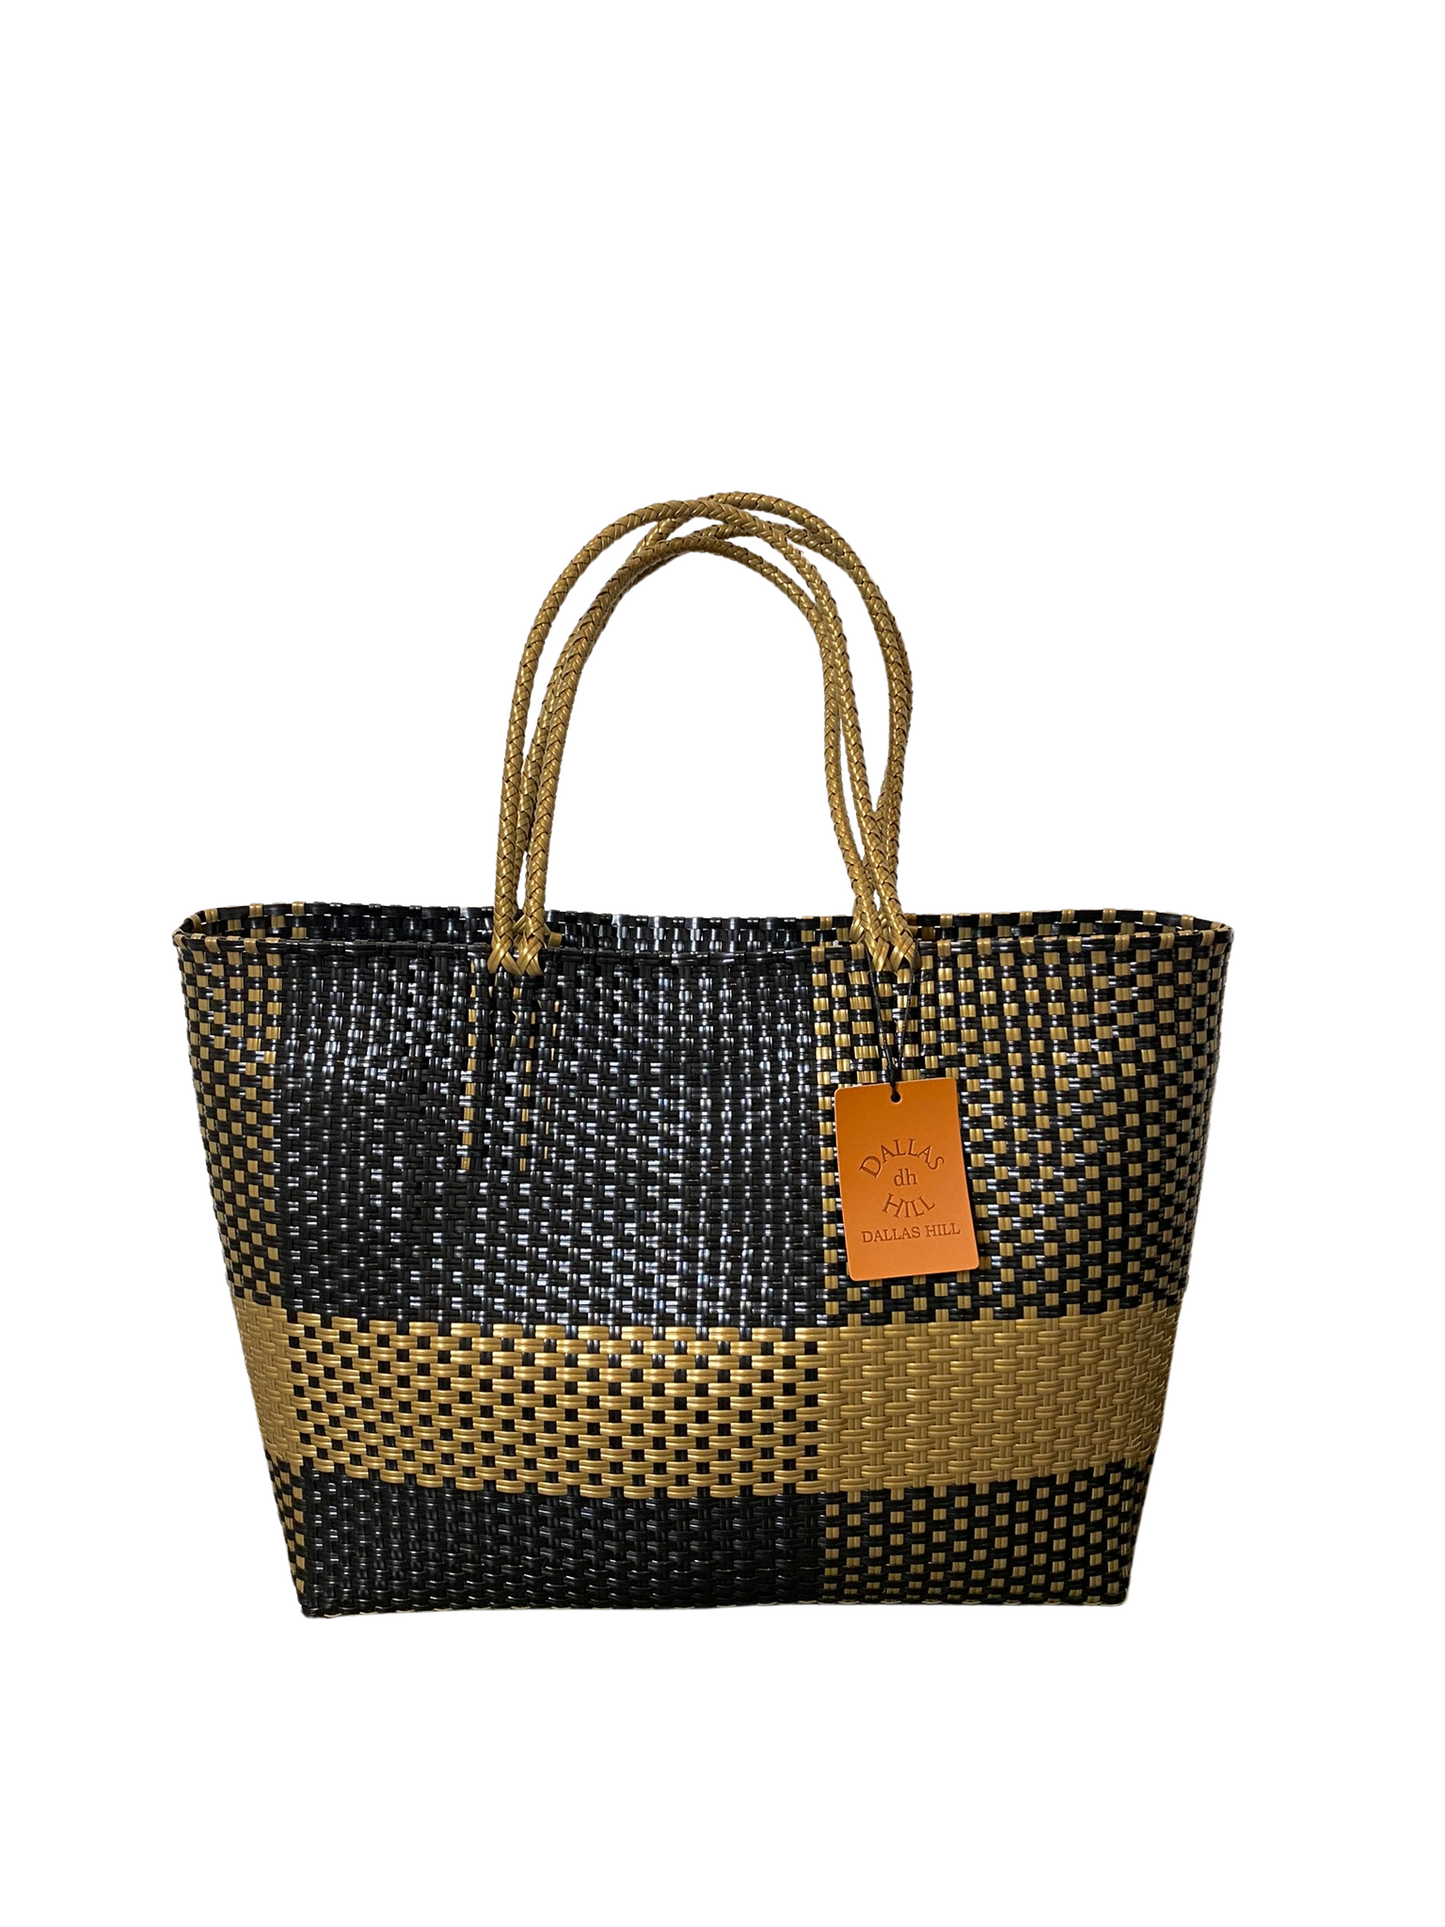 Sandy Toes Woven Tote Bag | Roolee